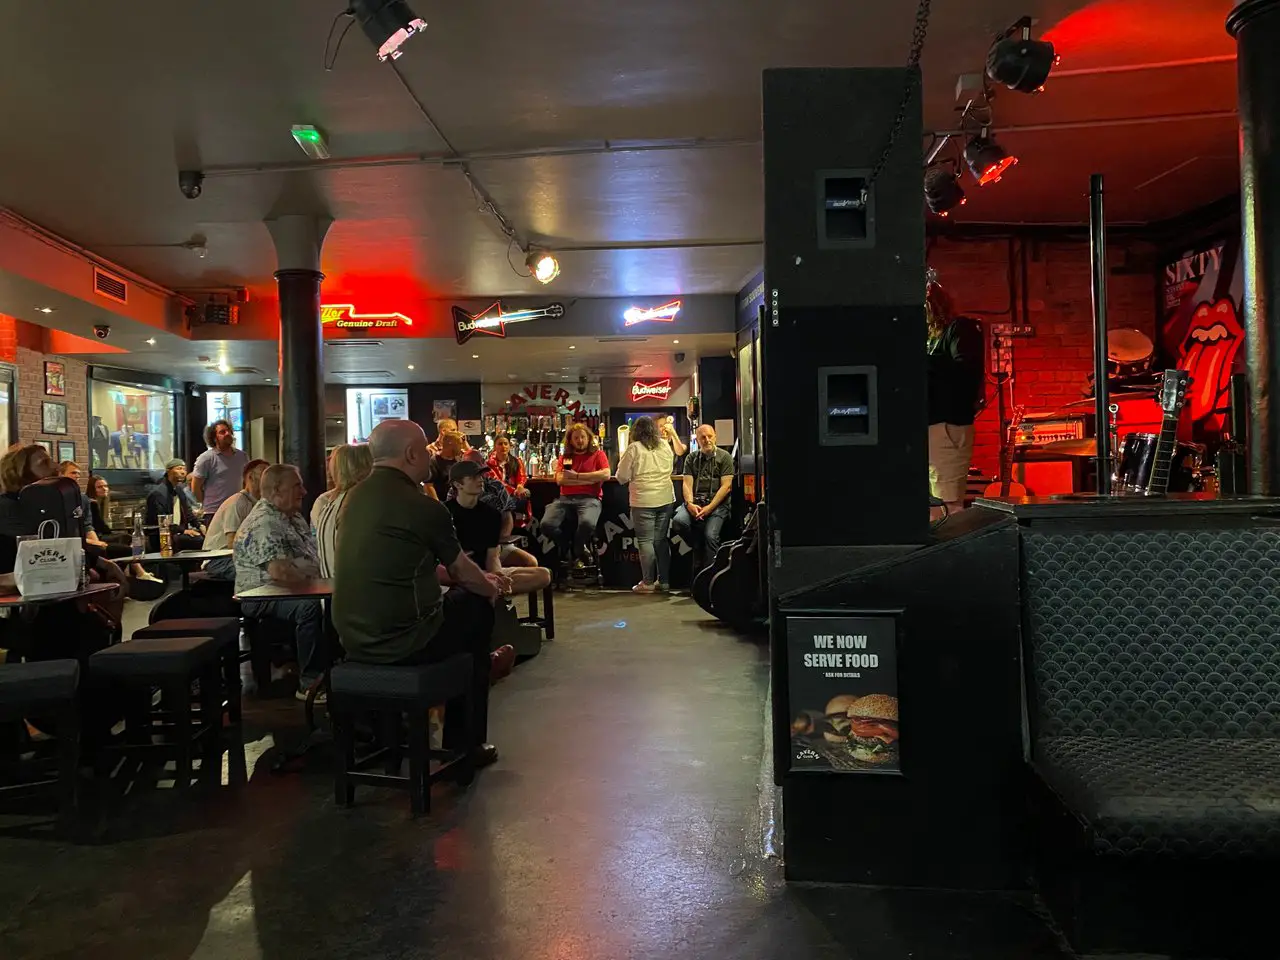 Inside the Cavern Pub in Liverpool on Monday Open Mic night. The pub is around half-full, and a man is standing on the stage. Liverpool's nightlife goes on all week long.